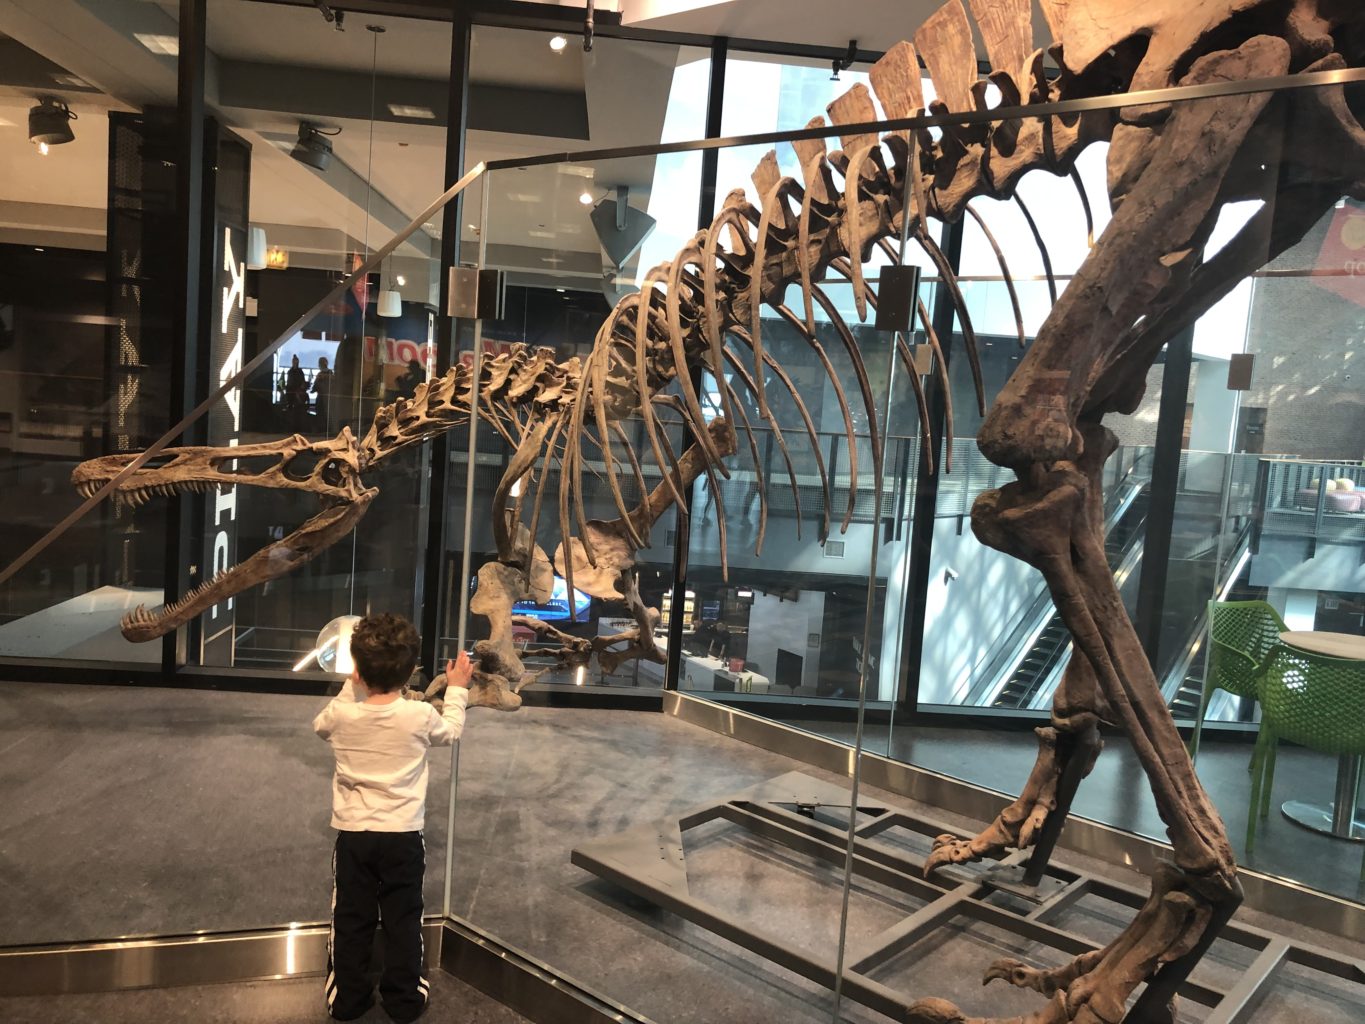 Family Field Trip: Chicago Children's Museum at Navy Pier | A parent's guide to exploring Chicago's highlights | Tips for making the most of your visit #chicago #navypier #travelwithkids #kidactivities